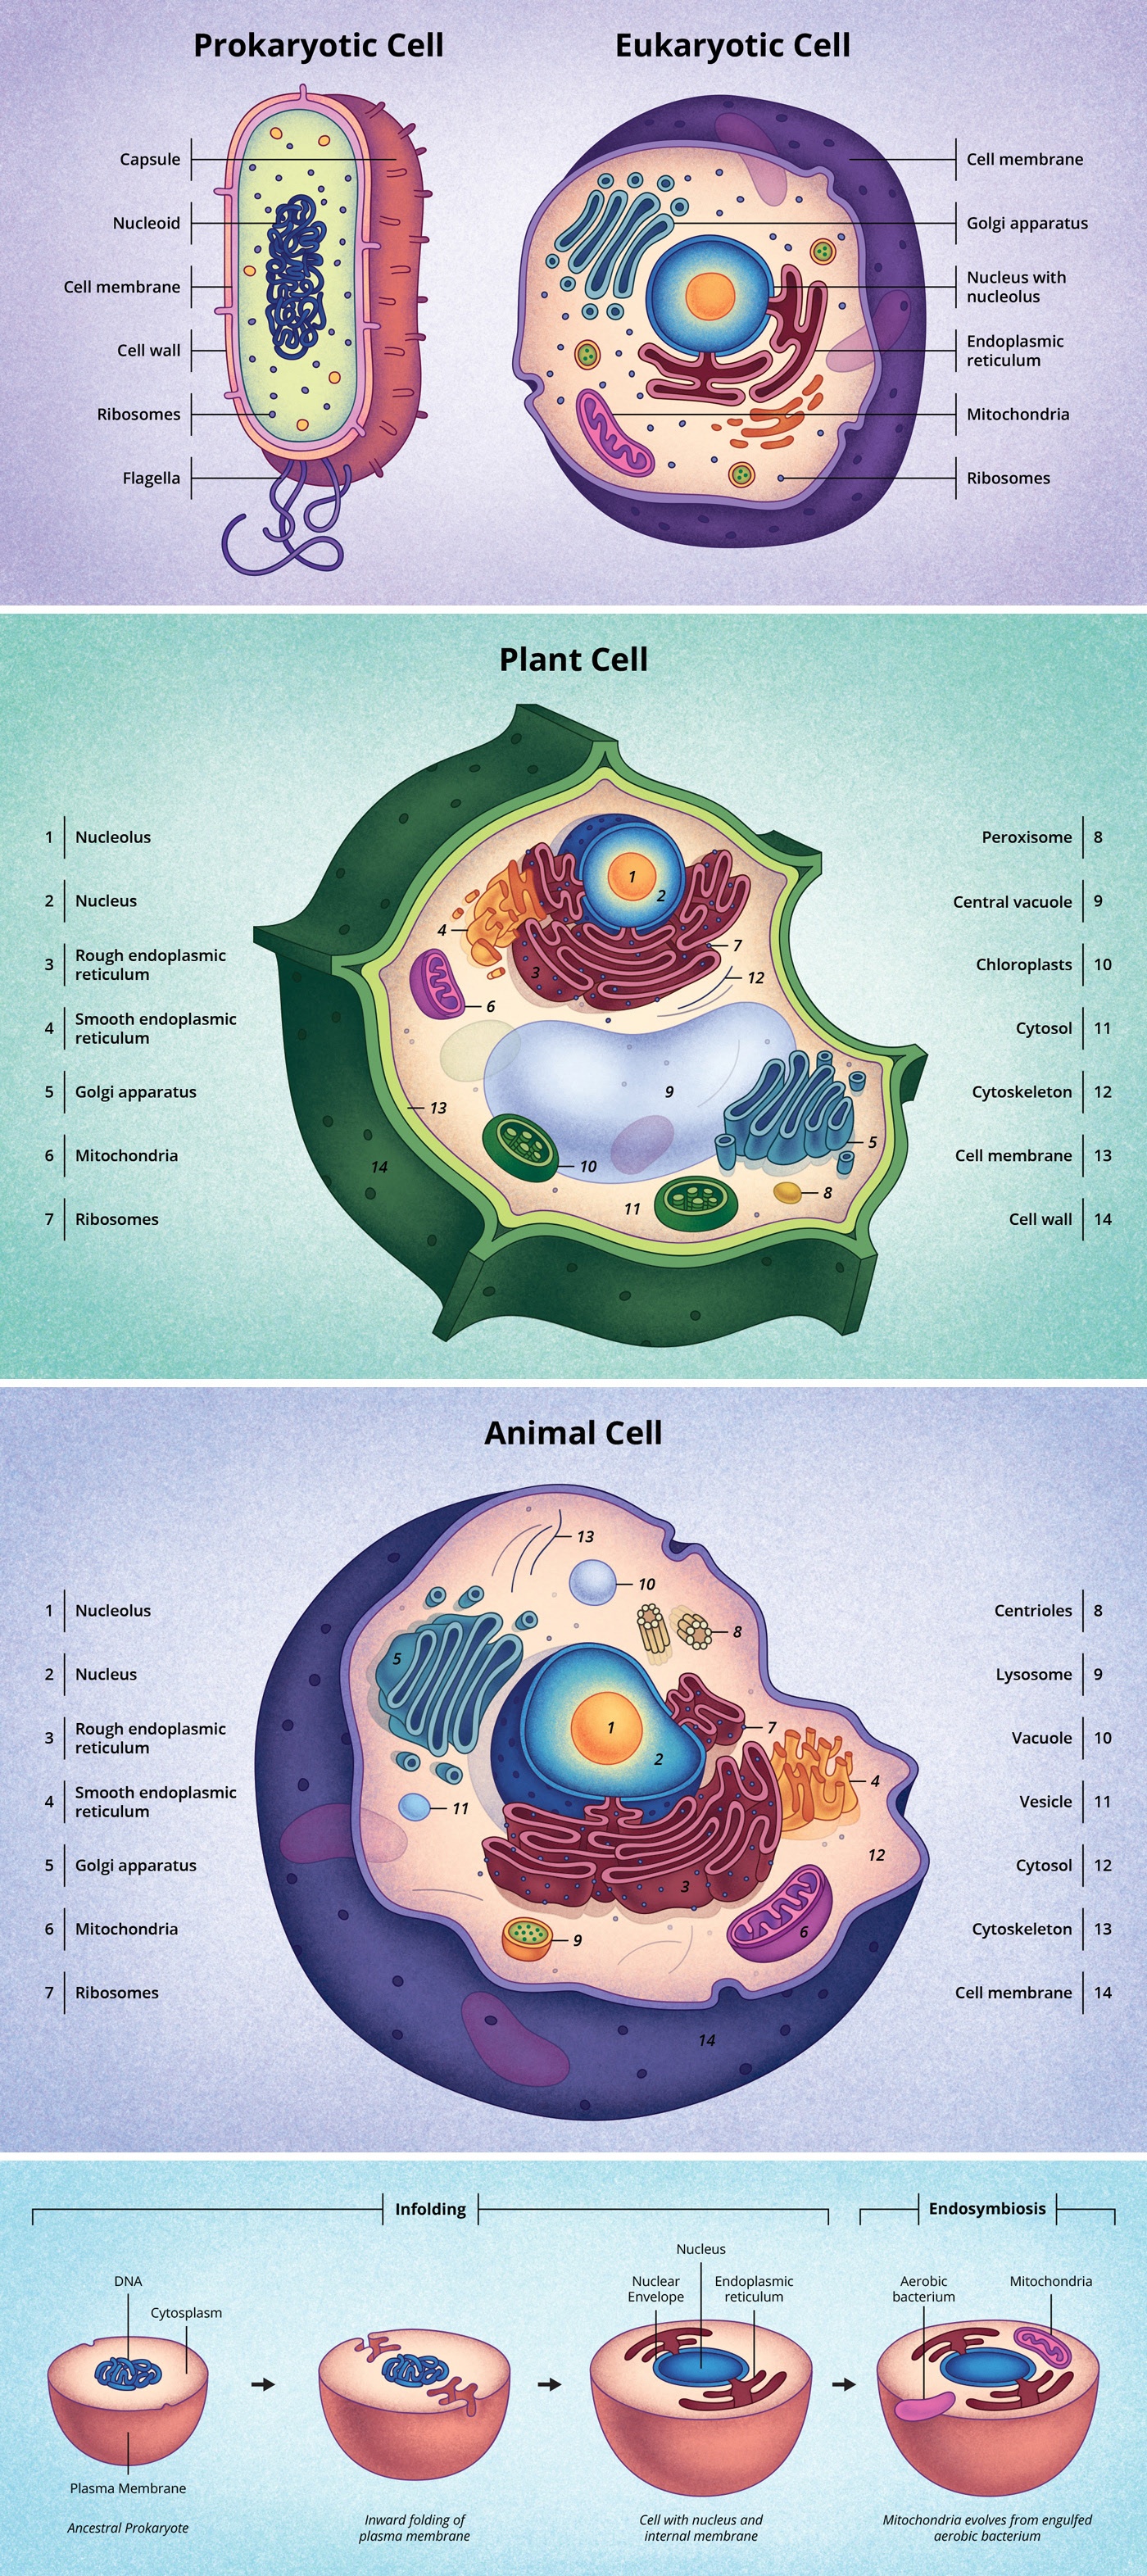 Illustrations created for 'Discovery and Structure of Cells